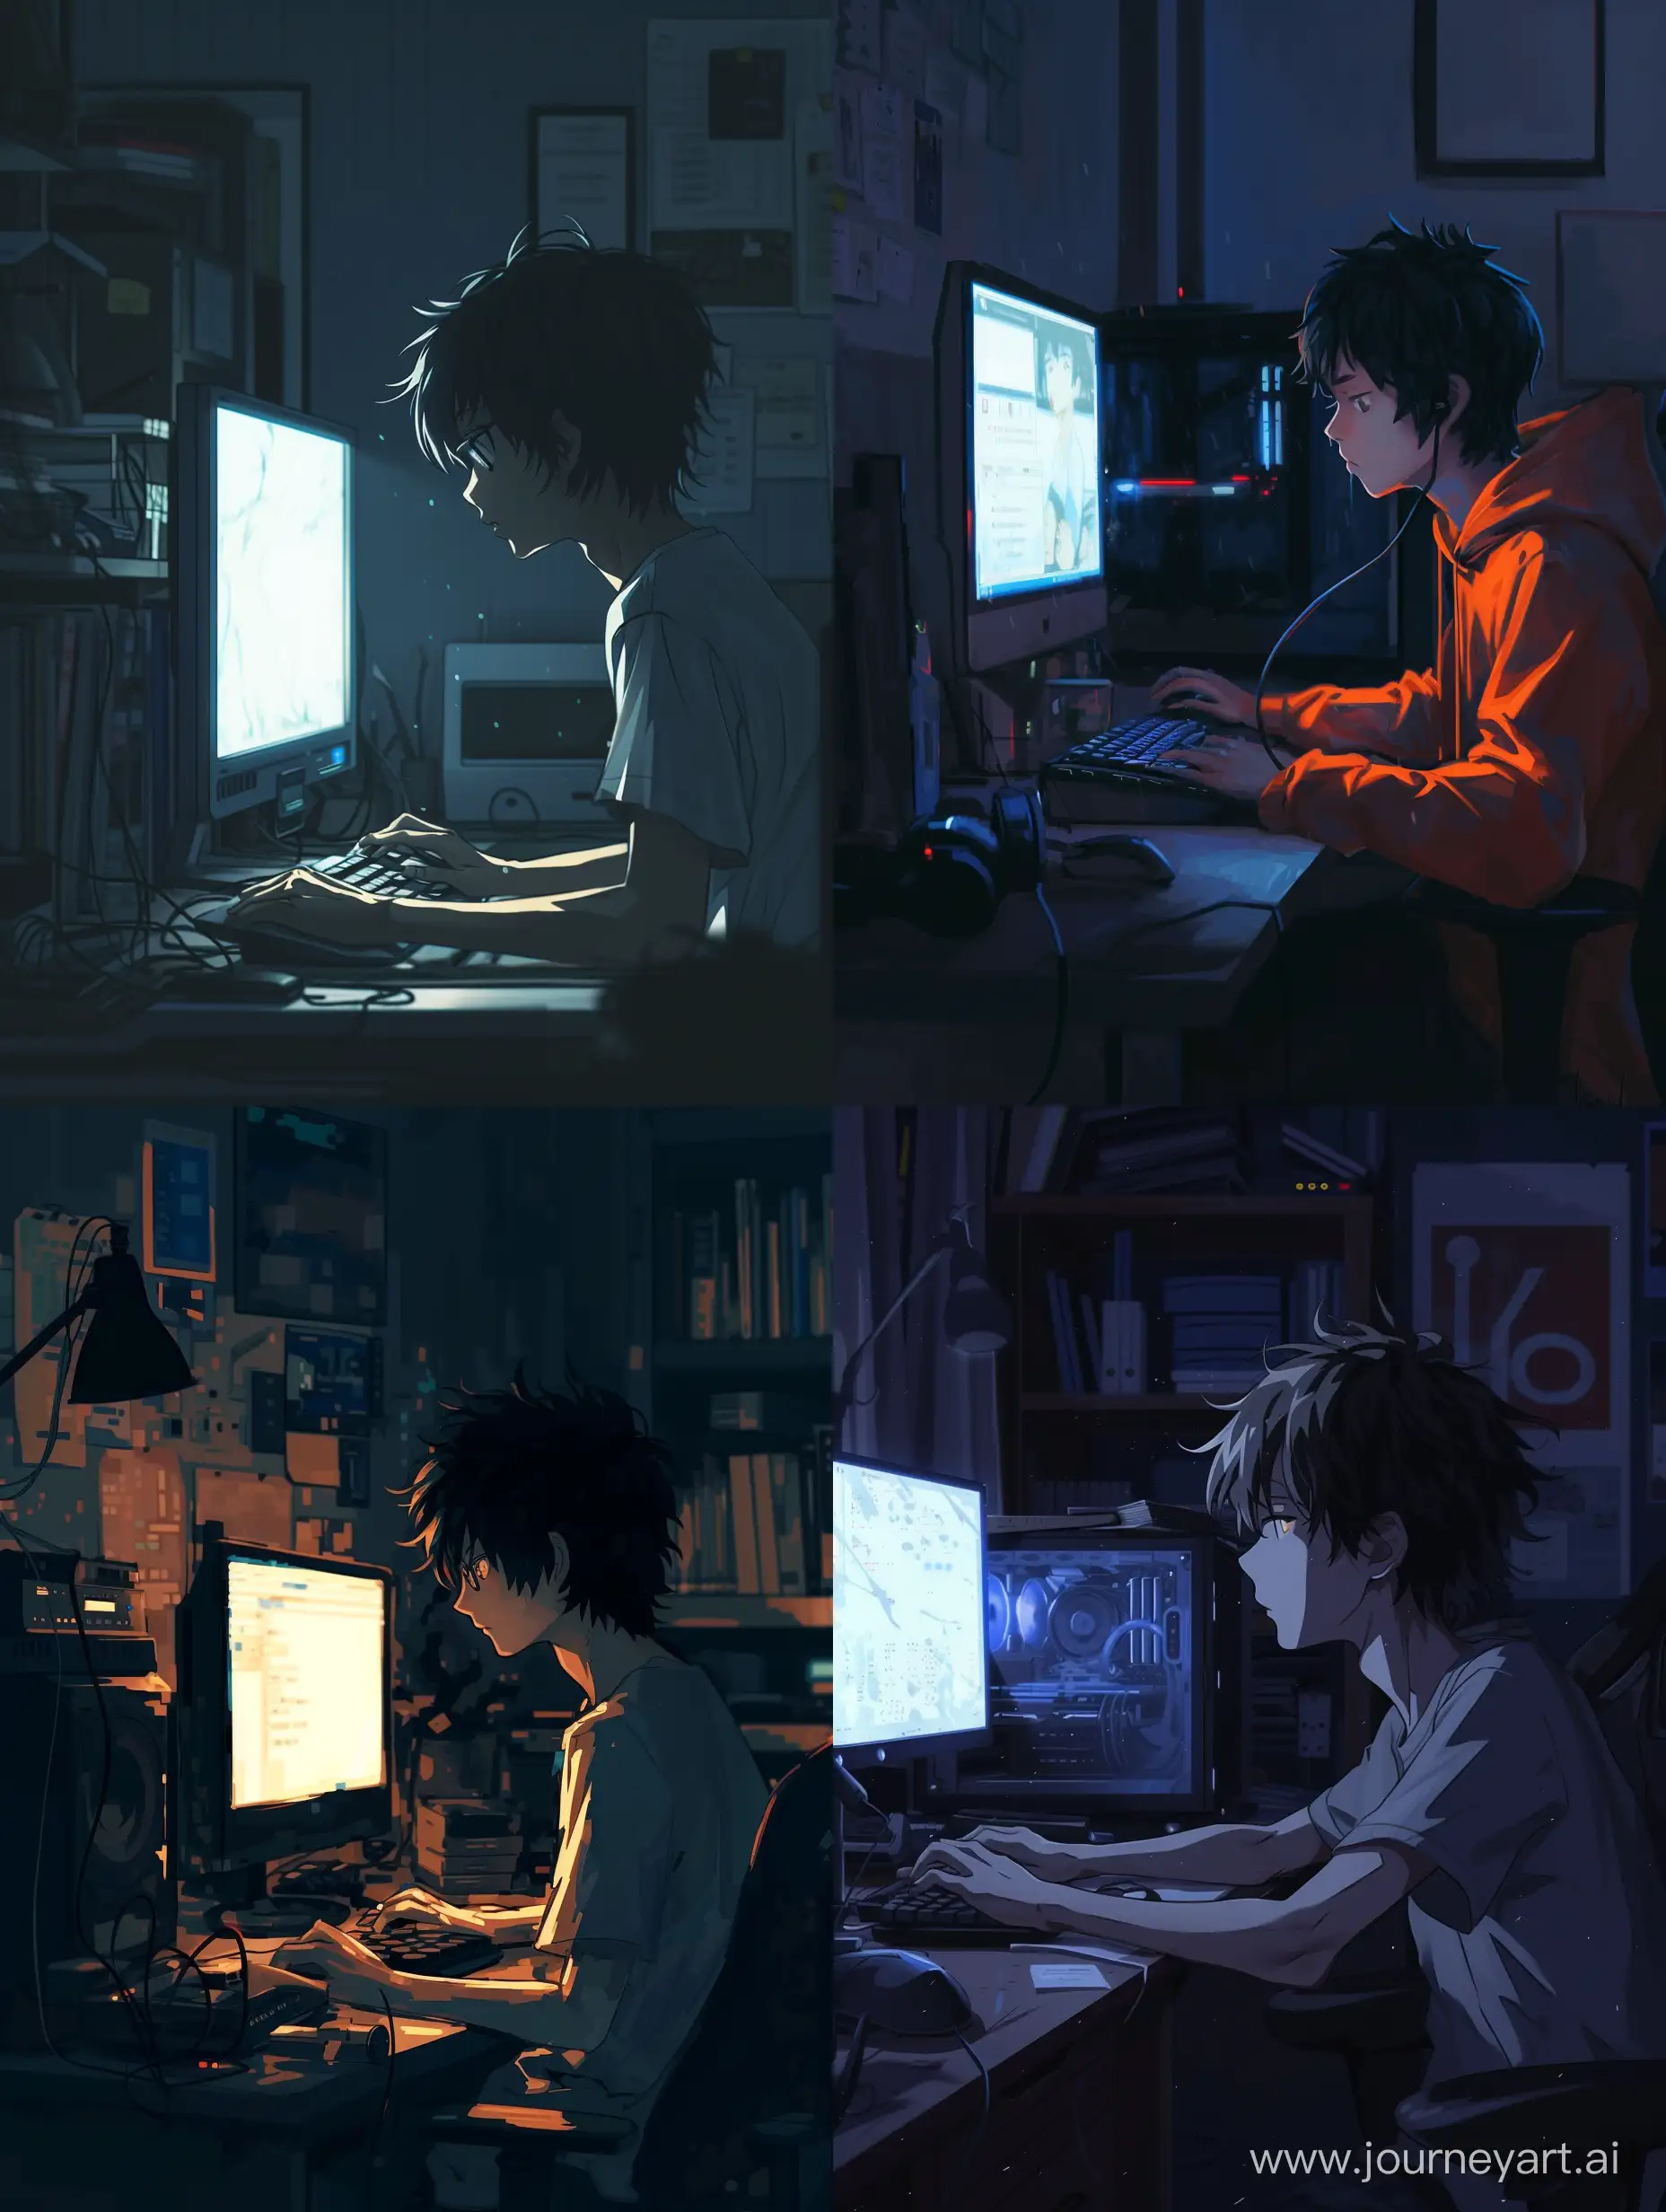 anime style, boy 16 years old and computer, dark room.